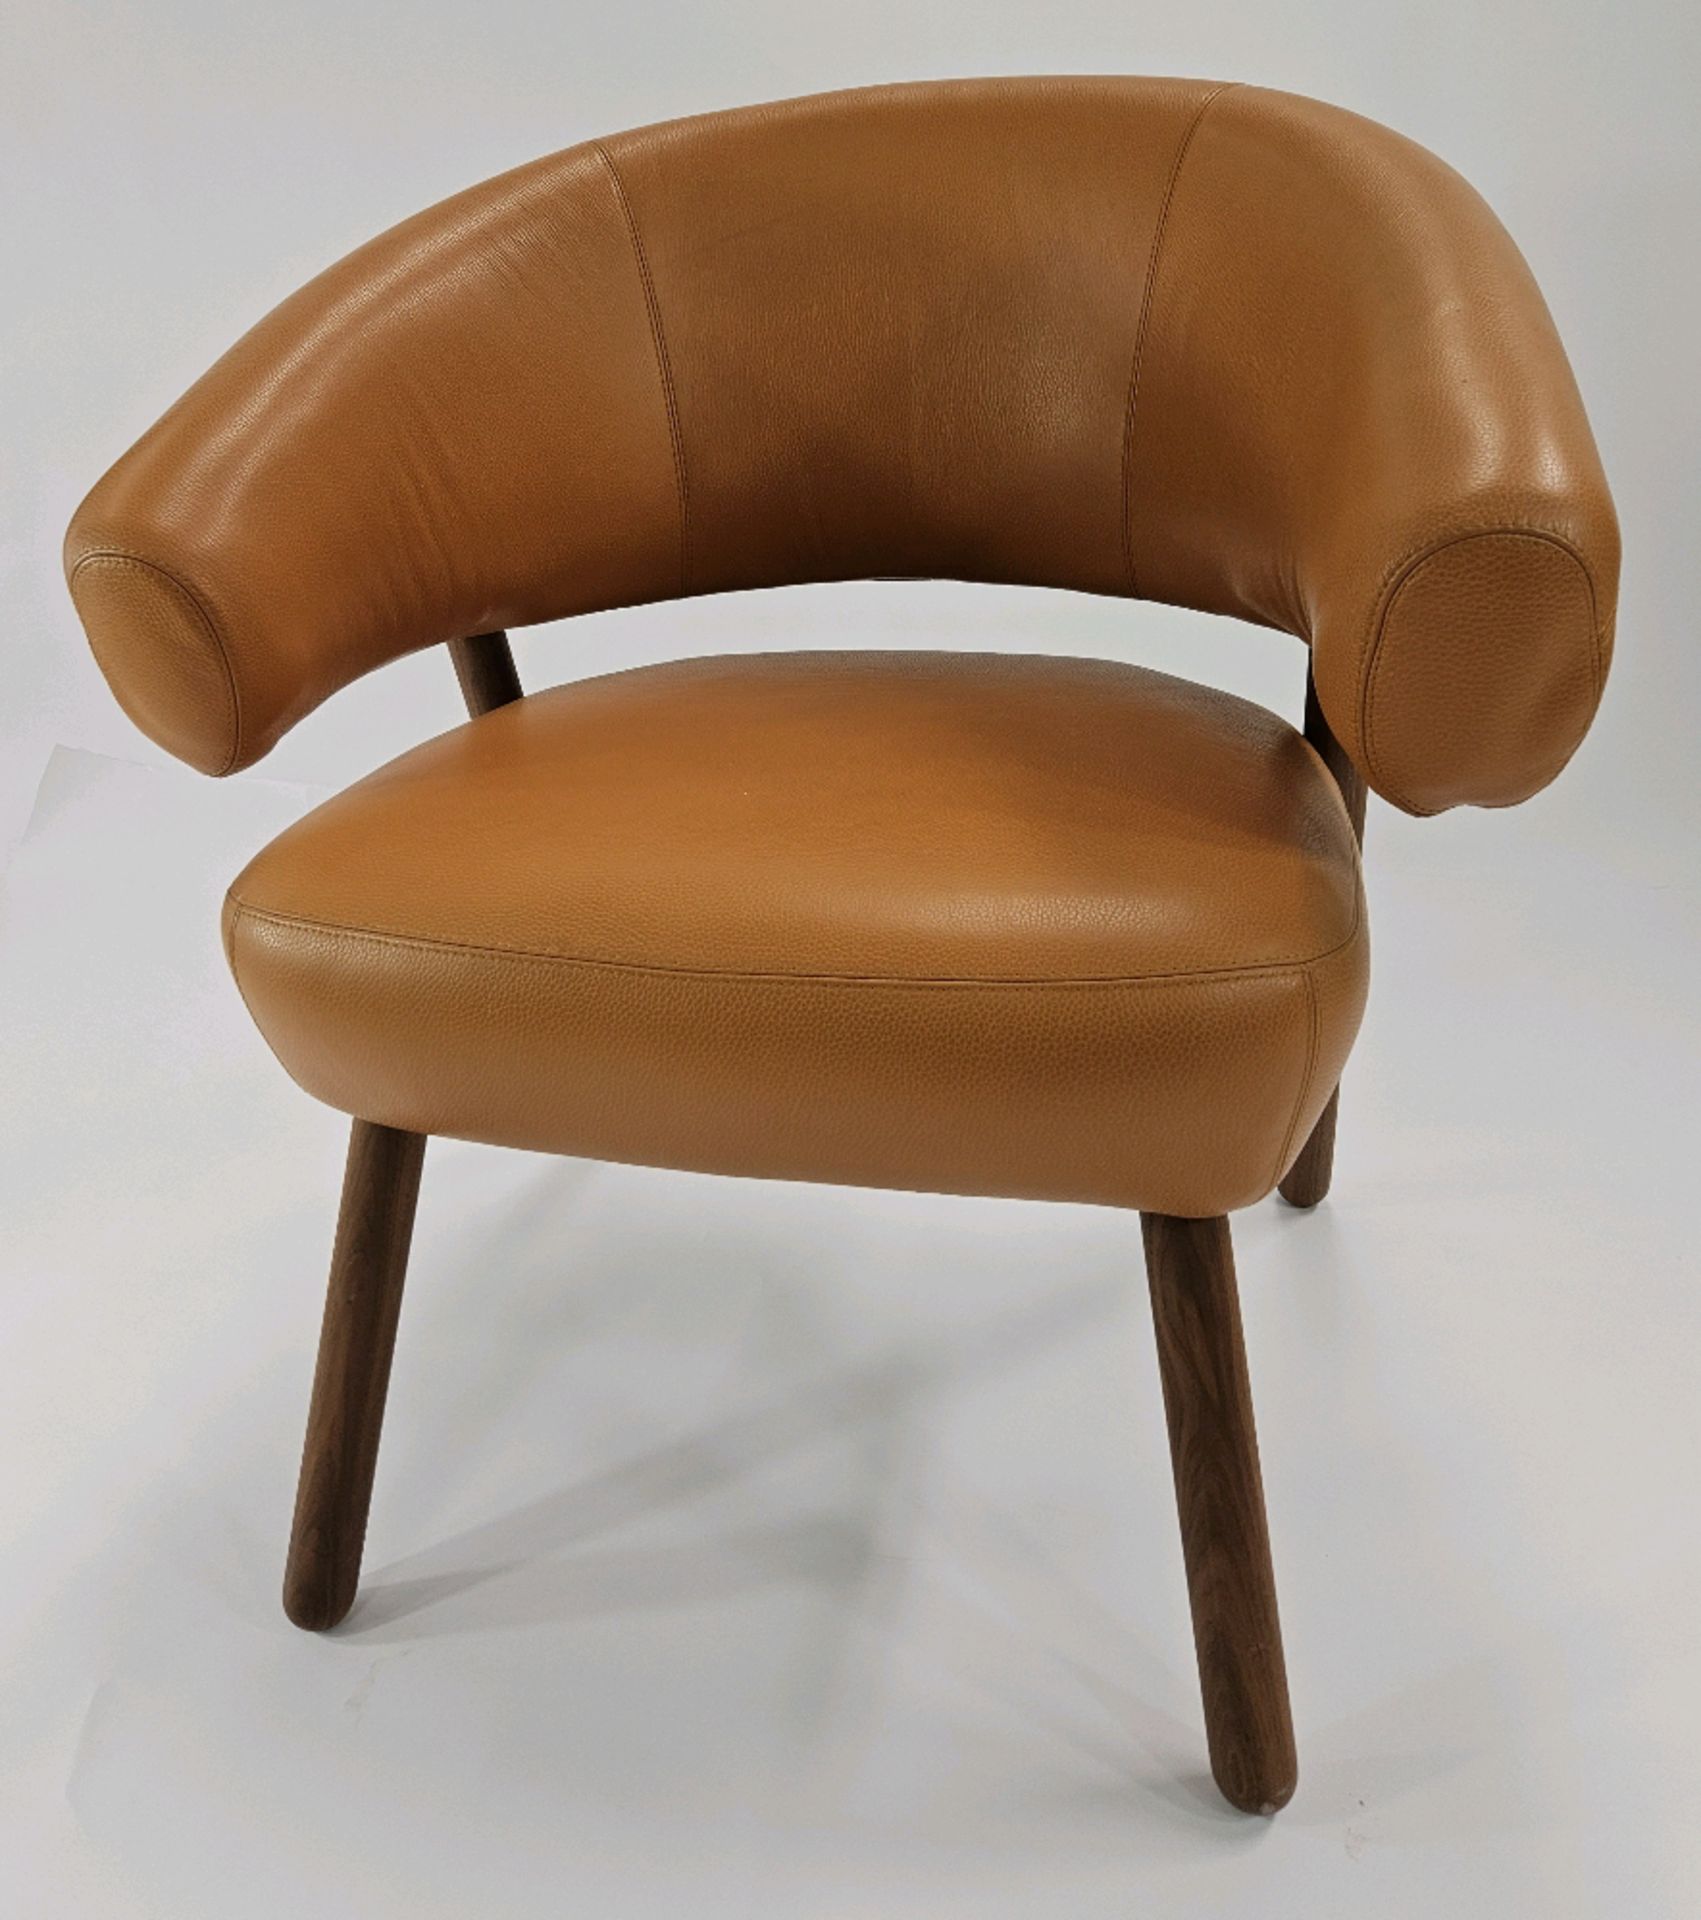 Modern Century Leather Chair - Image 2 of 3